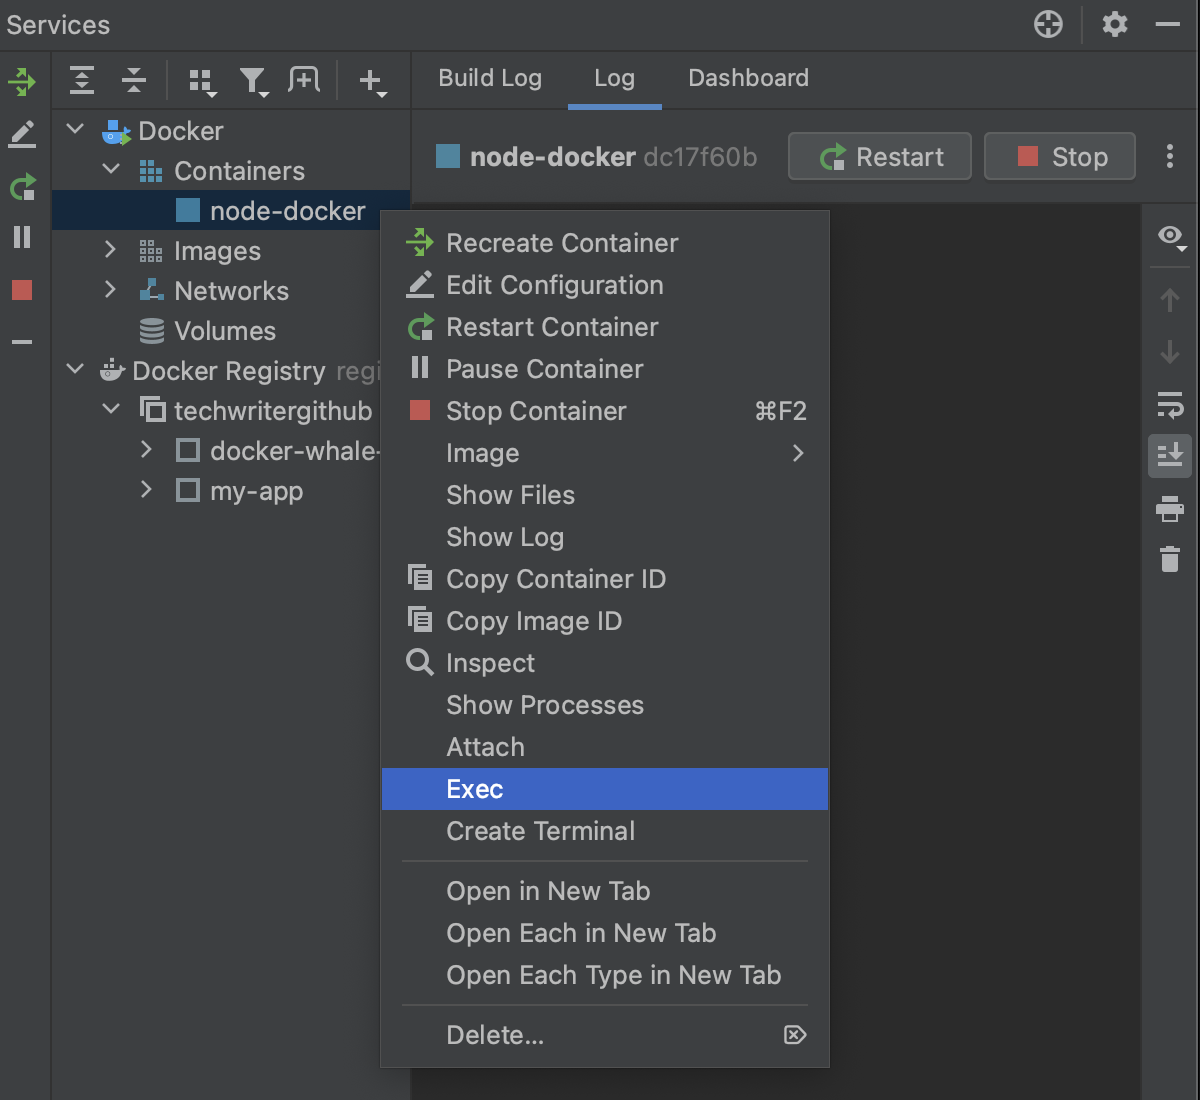 Execute command in a running container: select Exec from the context menu